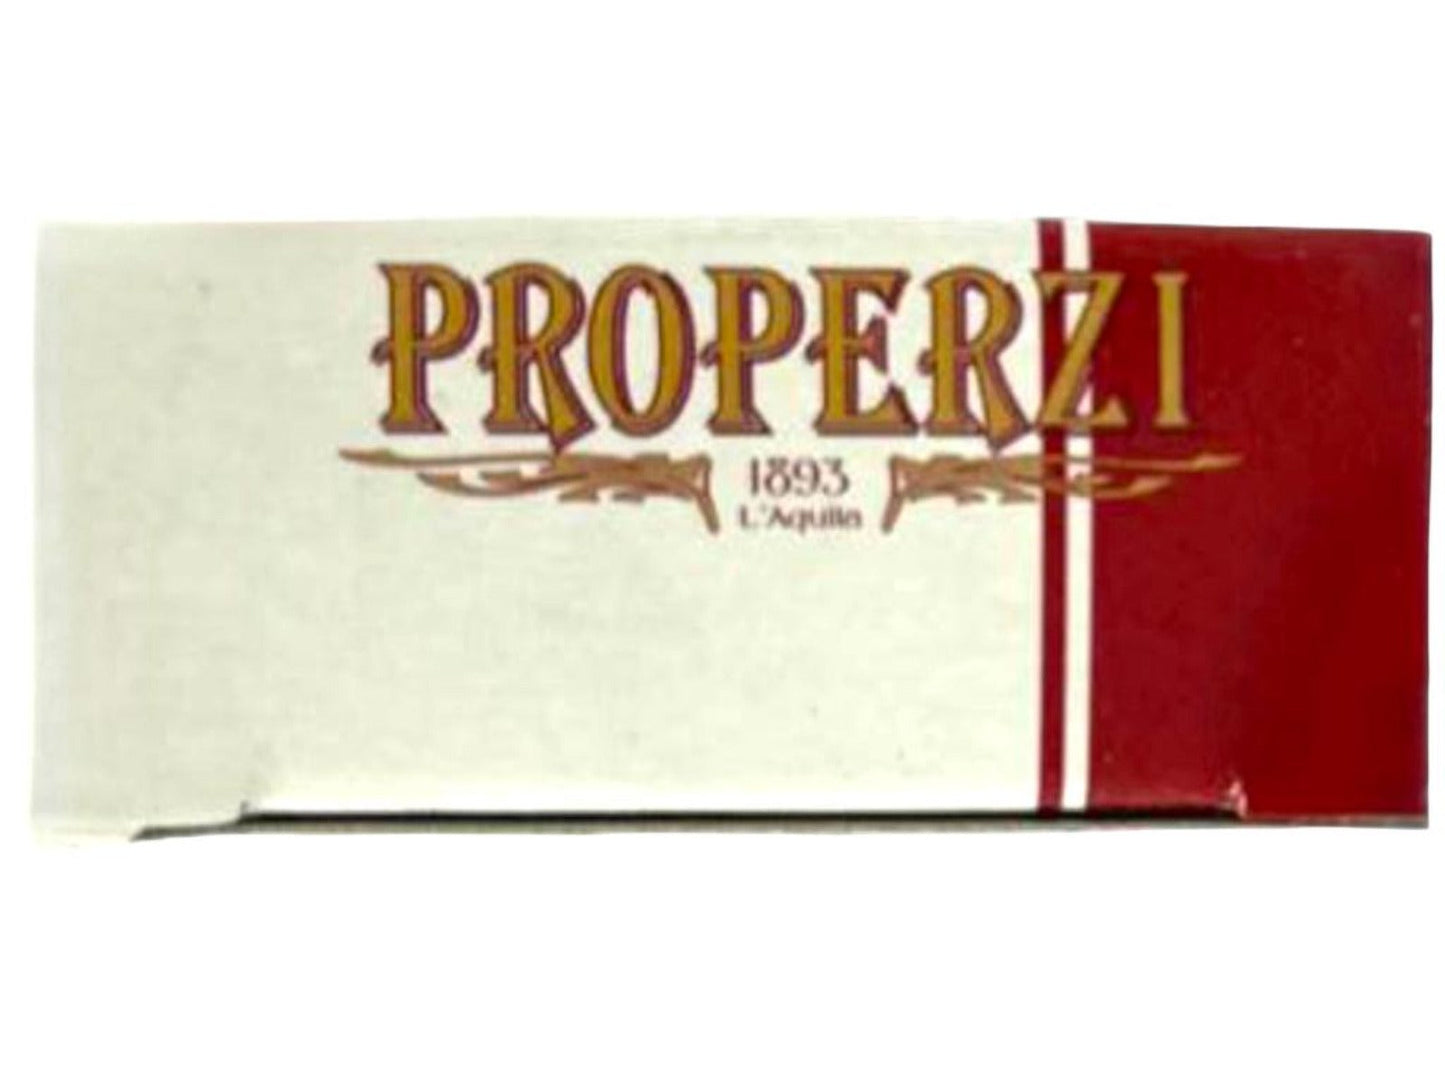 Properzi Italian Classic Nougat Candy With Almonds 200g - 2 Pack Total 400g Best Before end of Feb 2025